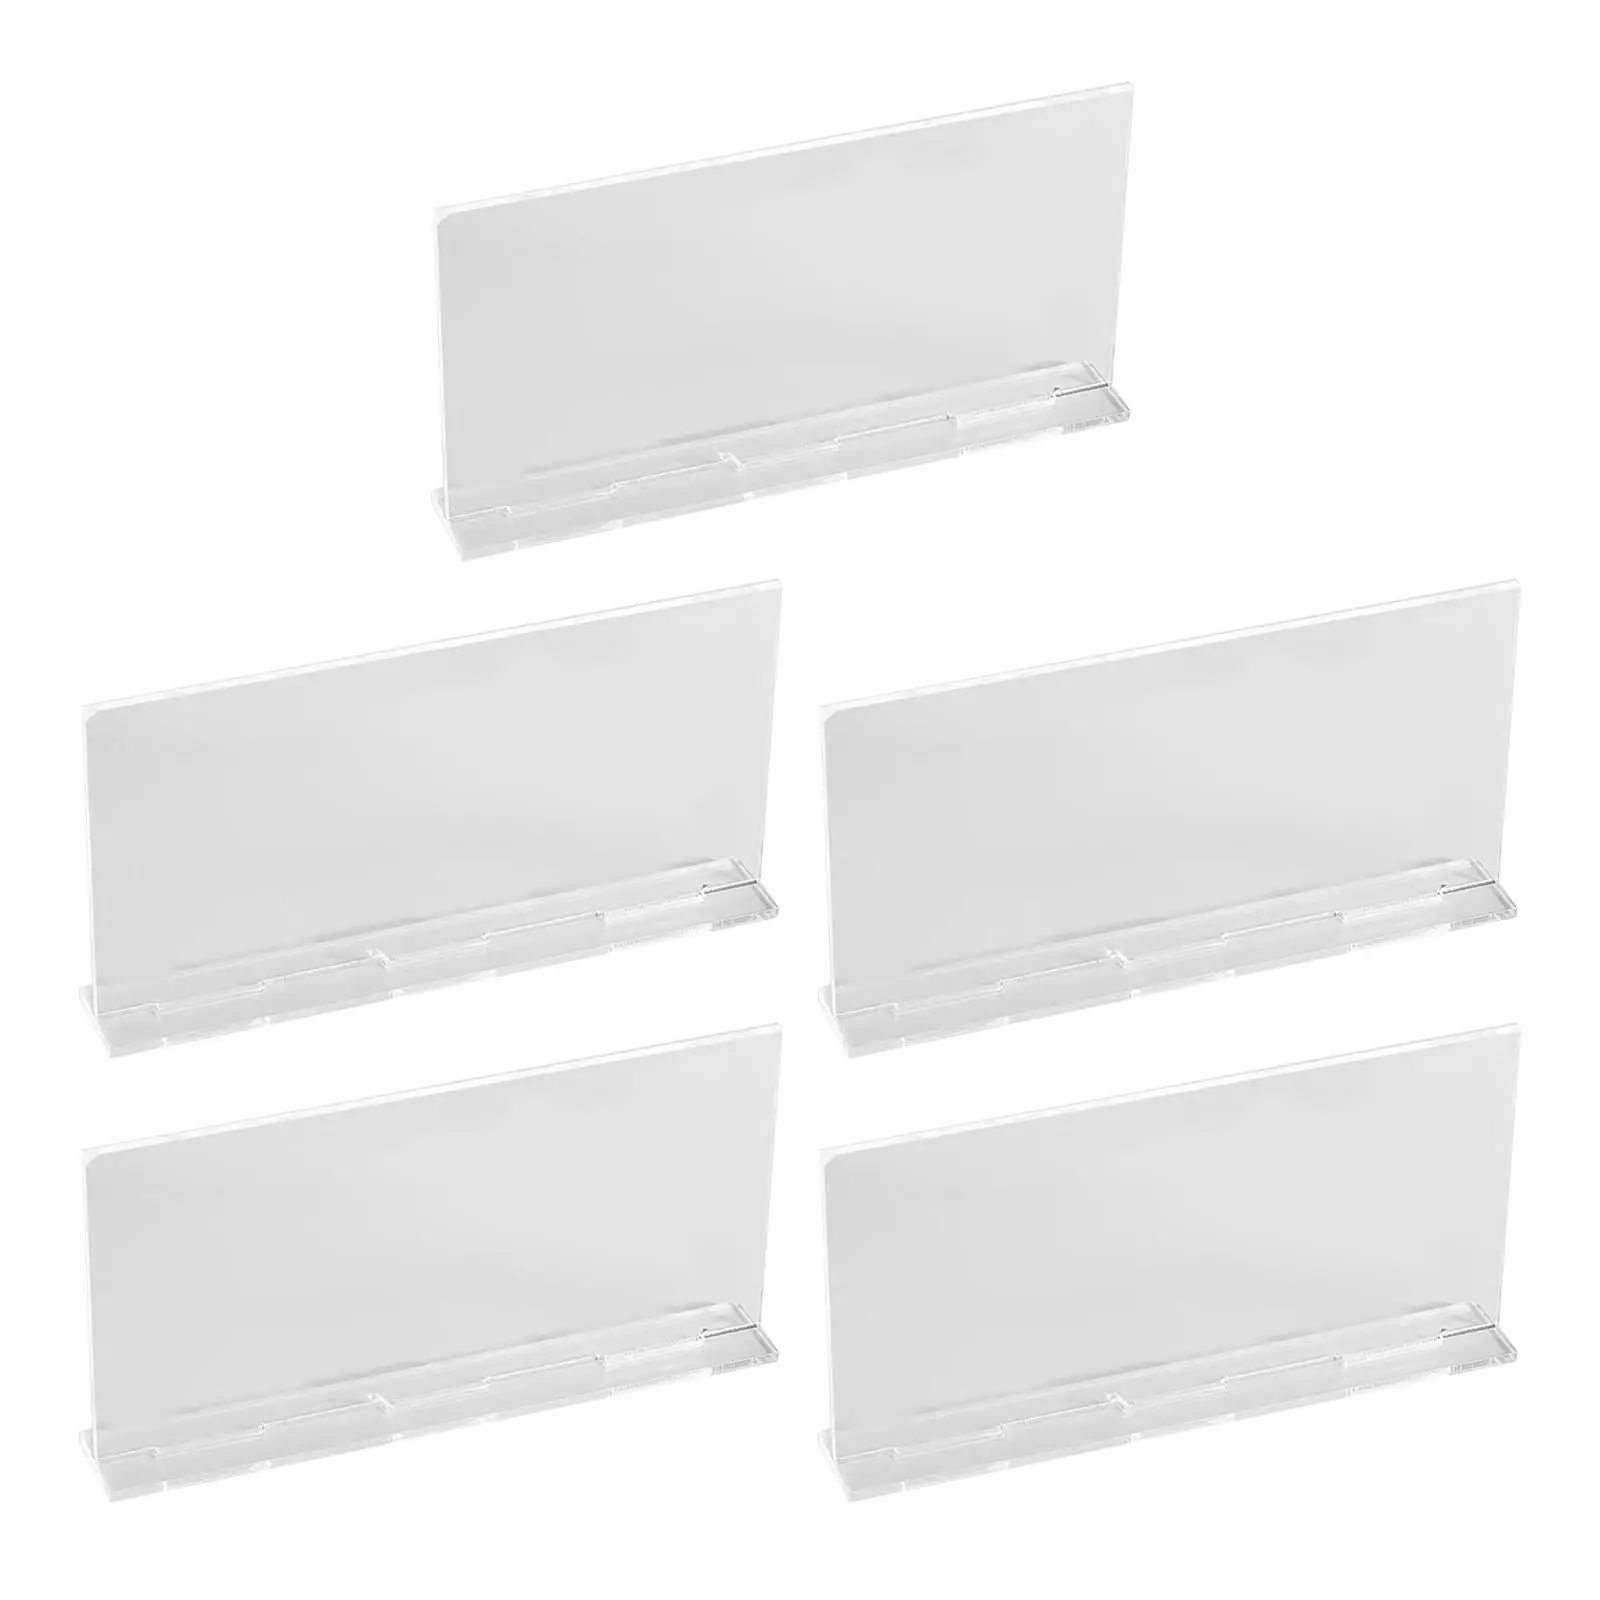 5x Clear Acrylic Place Cards with Stand Name Cards Seating Cards Table Numbers DIY for Dinner Wedding Birthday Banquet Event